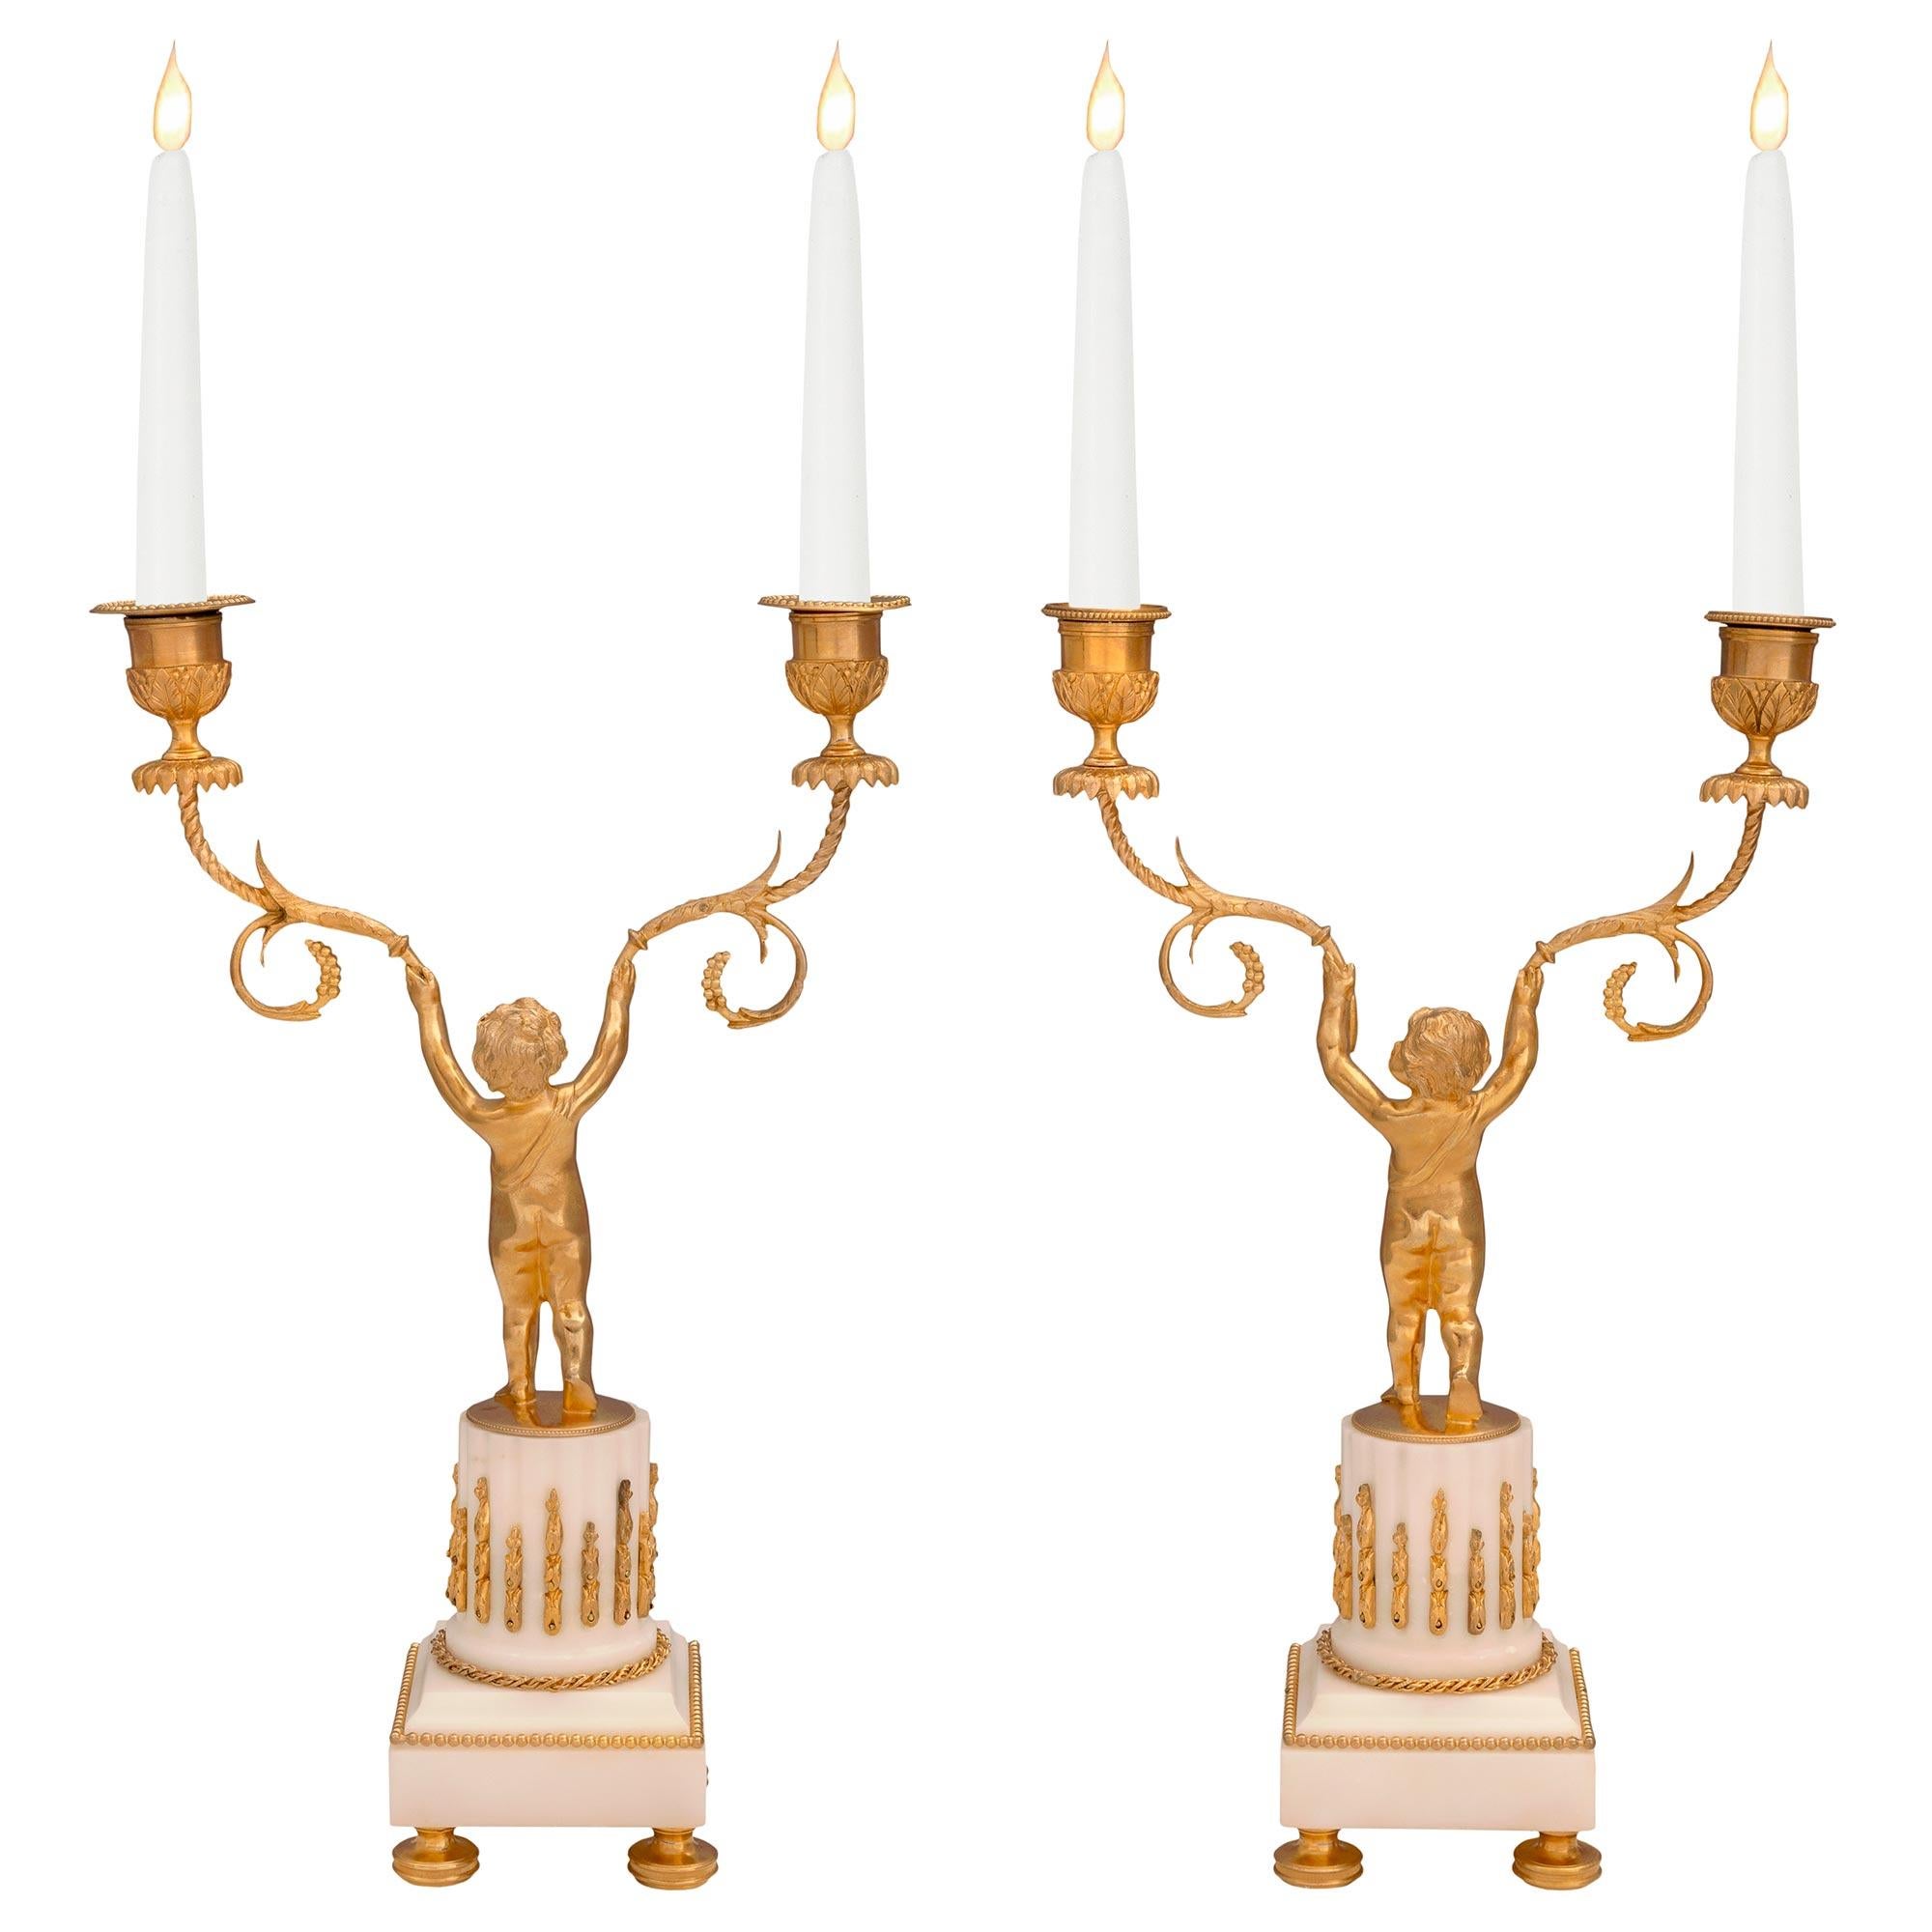 An elegant true pair of French 19th century Louis XVI st. ormolu and white Carrara marble candelabras. Each candelabras is raised by fine mottled bun shaped feet below the square white Carrara marble base. The bases display charming intertwined